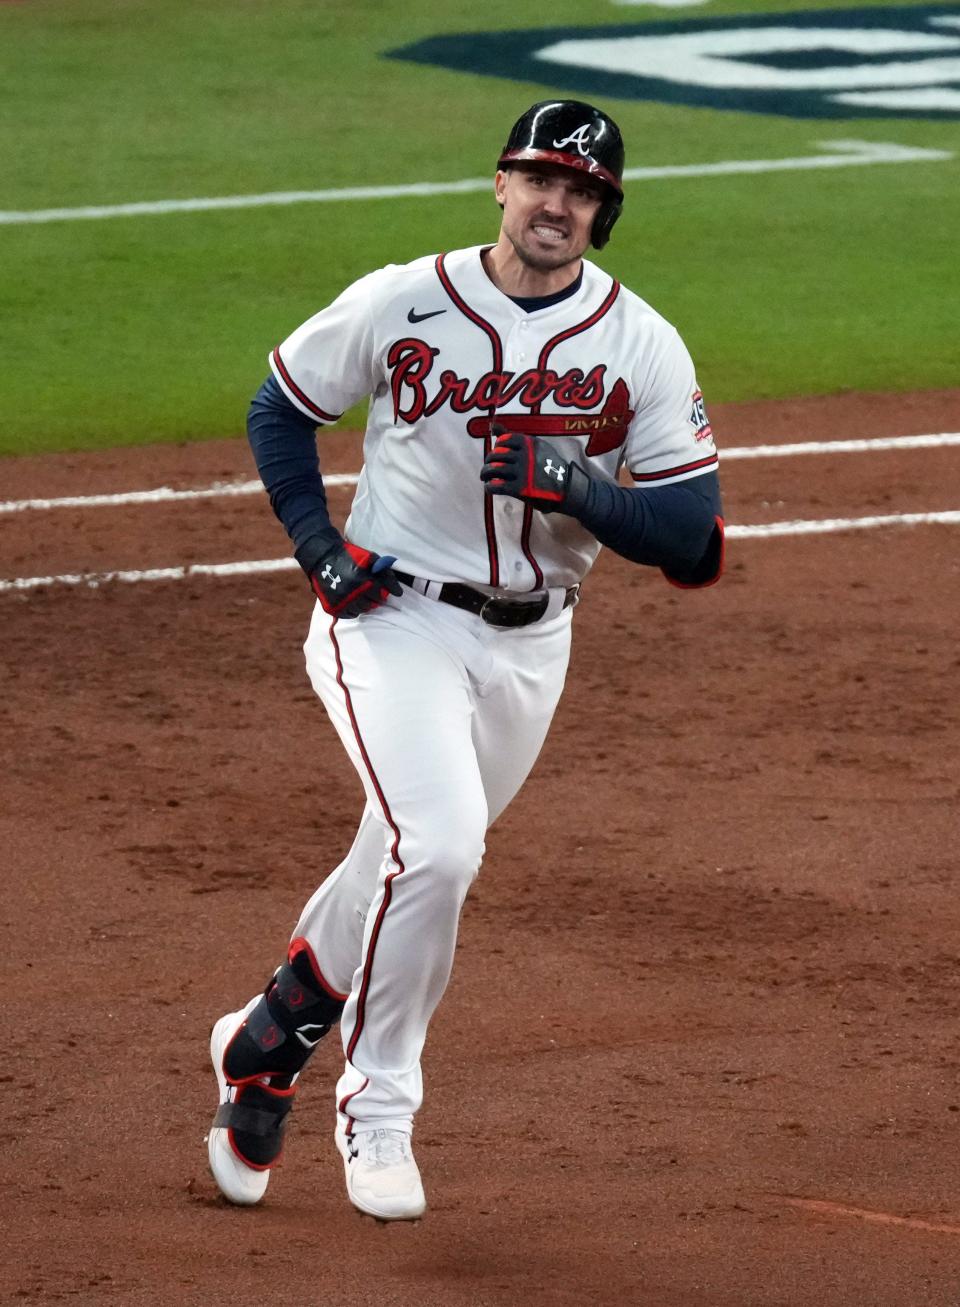 Adam Duvall rounds the bases after hitting a grand slam for the Braves against the Astros in Game 5 of the World Series.